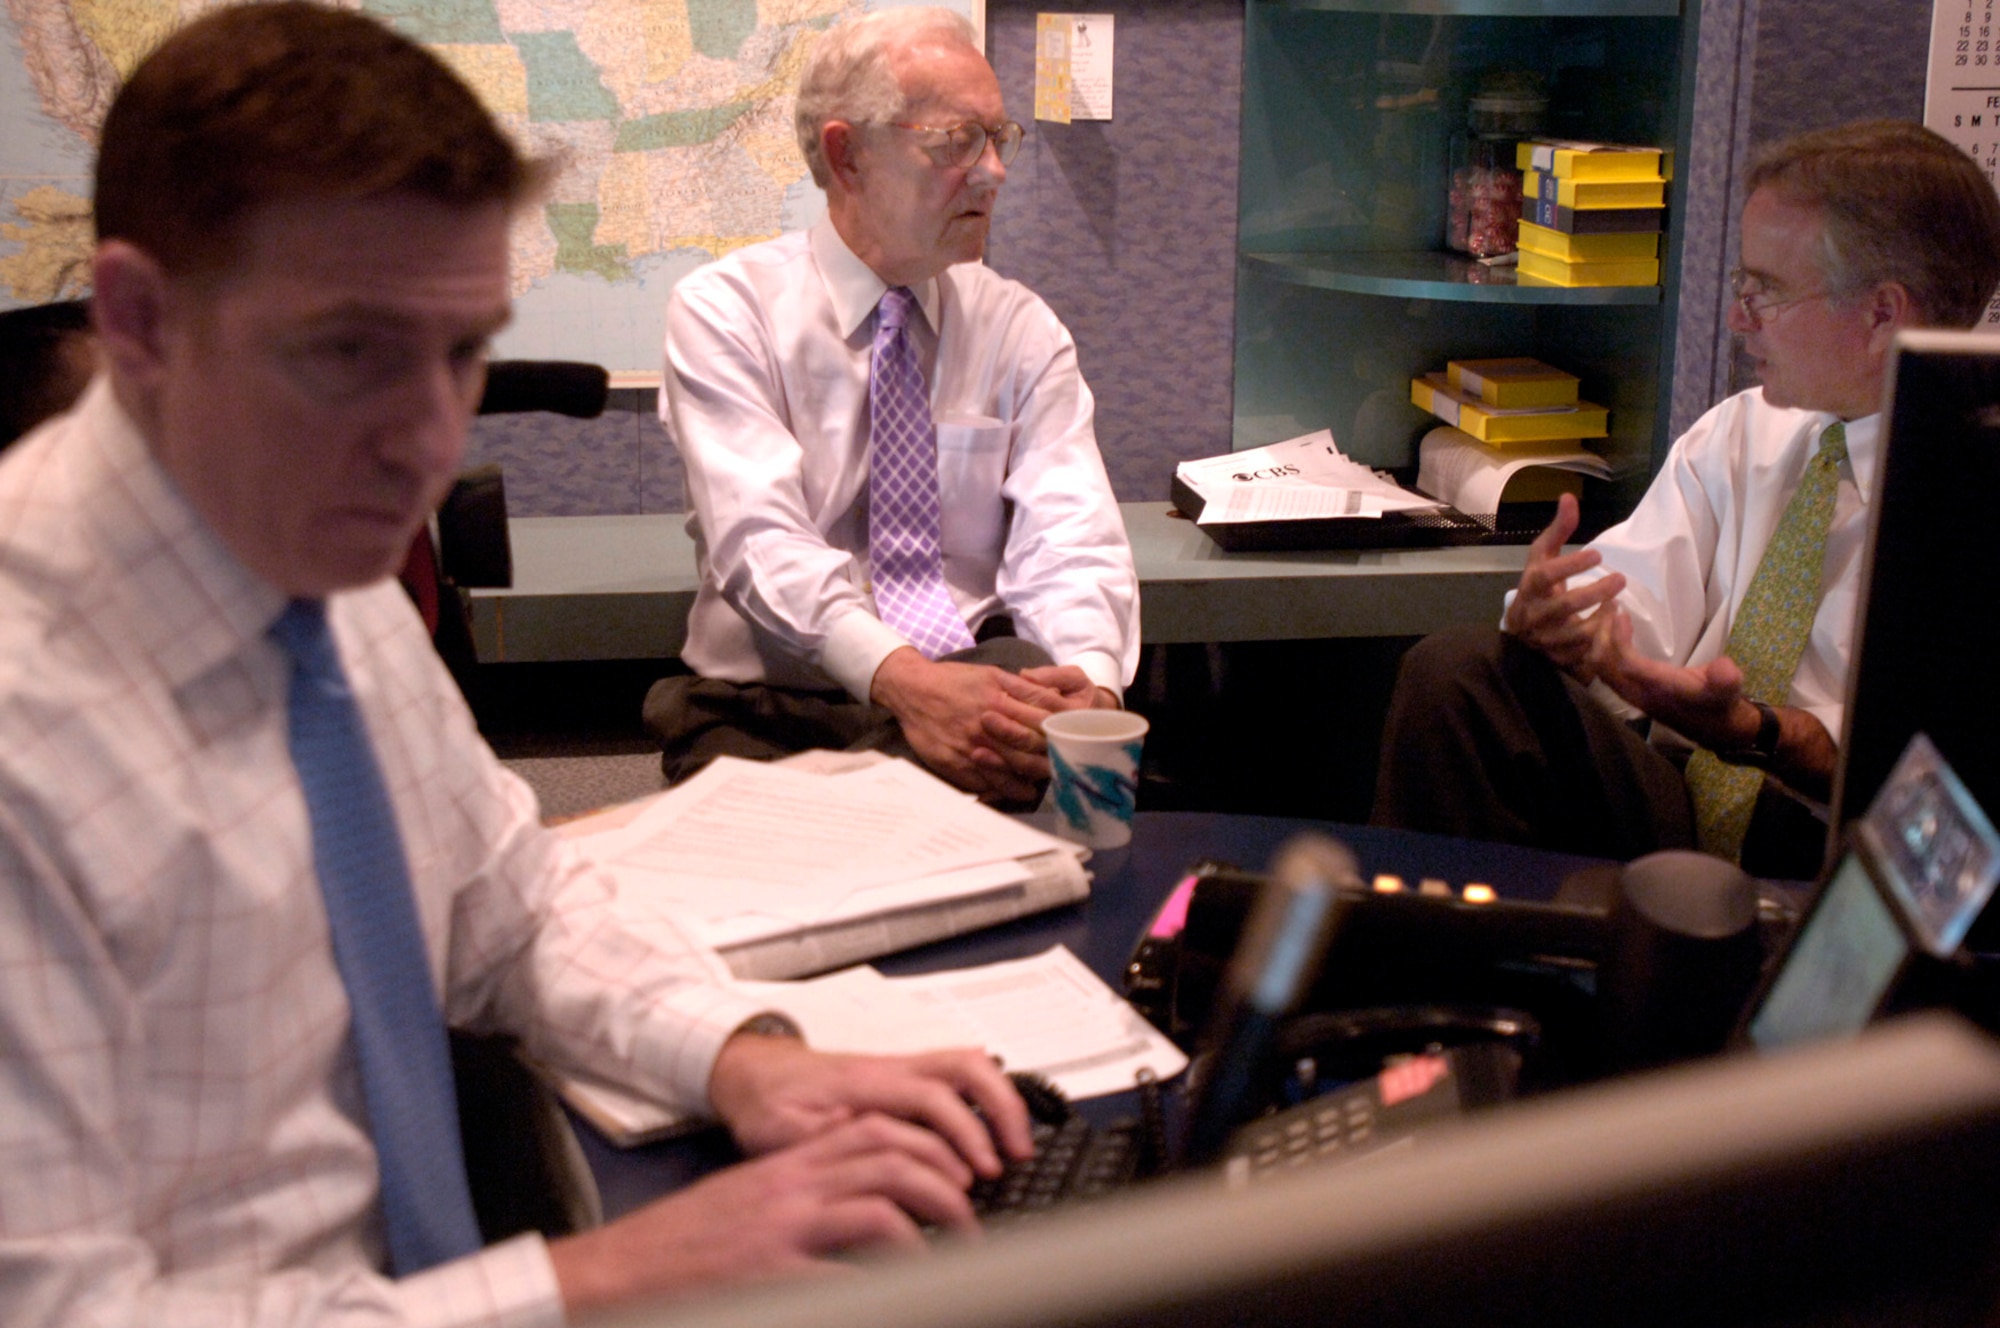 Bob Schieffer, chief Washington correspondent for "CBS News" and anchor/moderator of "Face the Nation," discusses the news lineup with Rome Hartman (right), executive producer, and Bill Owens, senior broadcast producer, at CBS in New York City on Tuesday, April 11, 2006. Mr. Schieffer once served in the Air Force as editor of The Global Ranger newspaper at Travis Air Force Base, Calif. (U.S. Air Force photo/Master Sgt. Scott Wagers) 